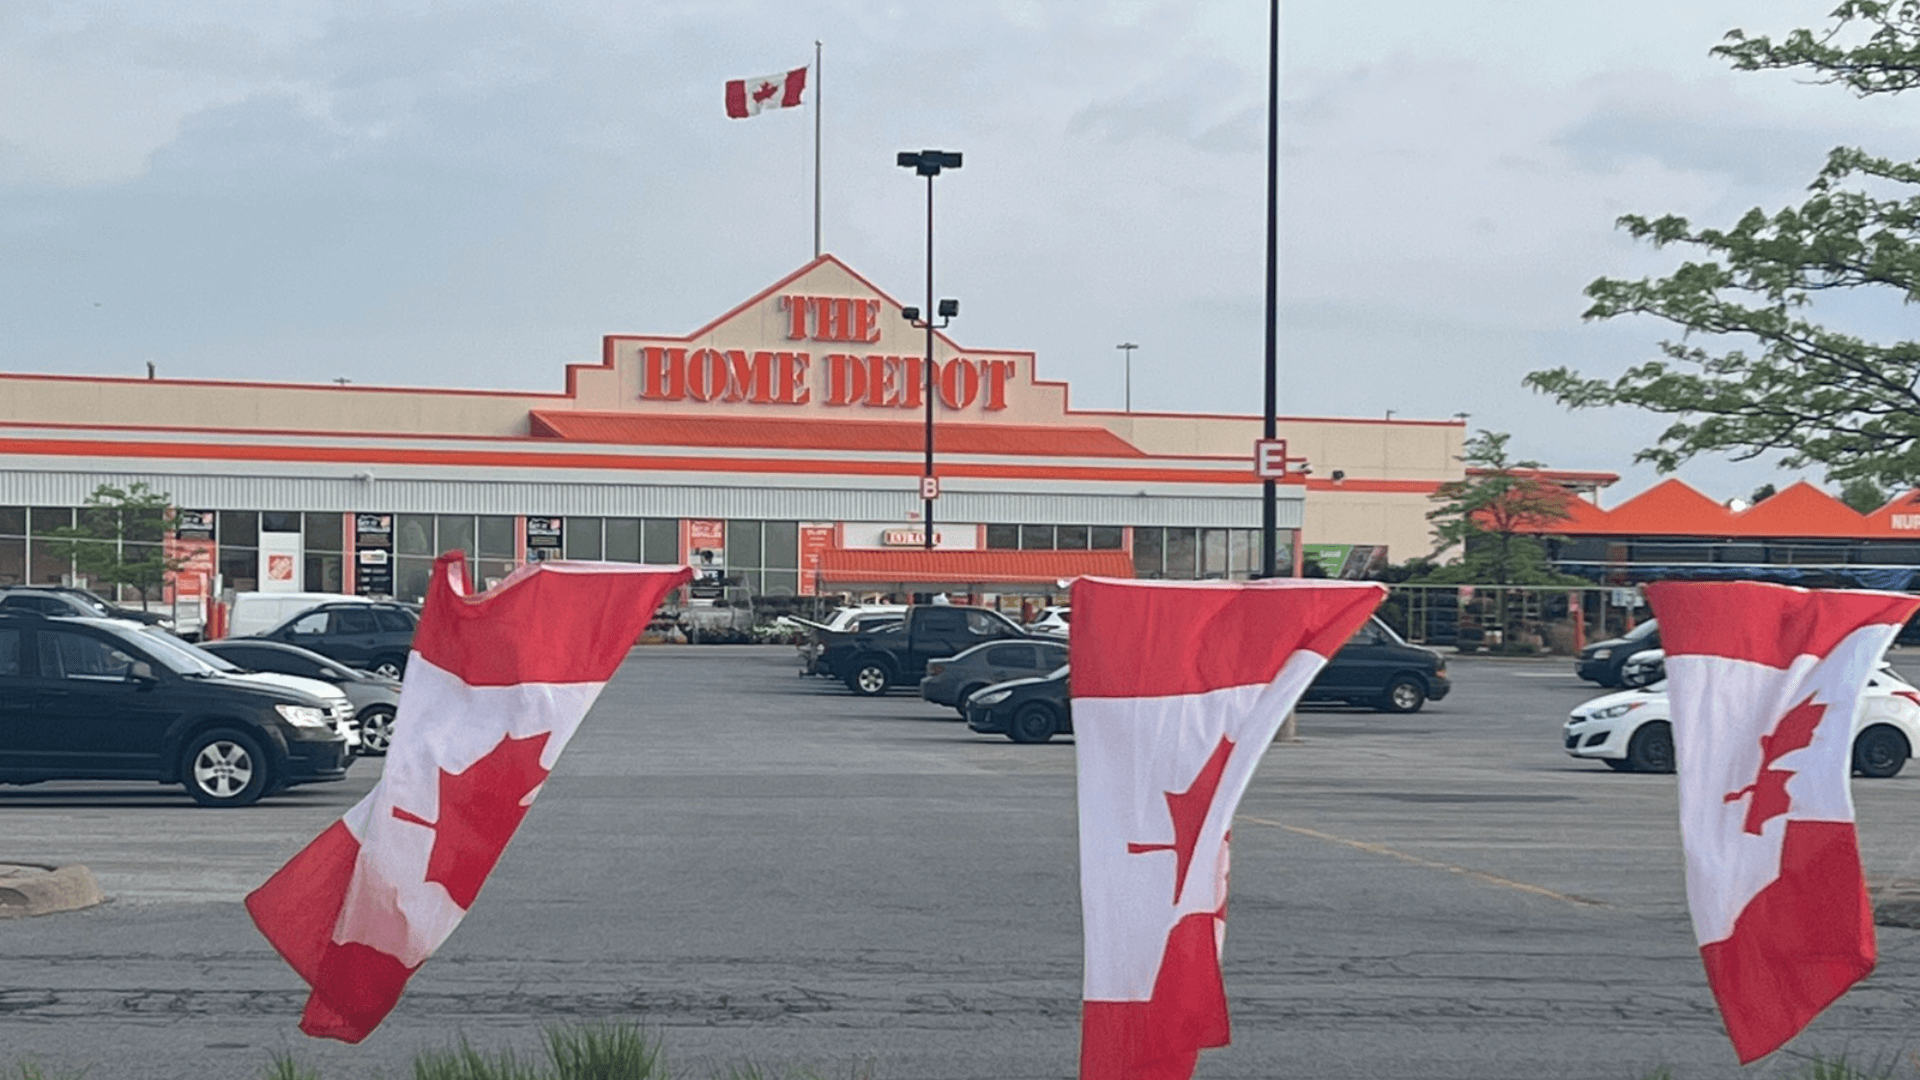 Home Depot overtakes Canadian Tire as base for 'anti-Trudeau' events - NOW  Toronto